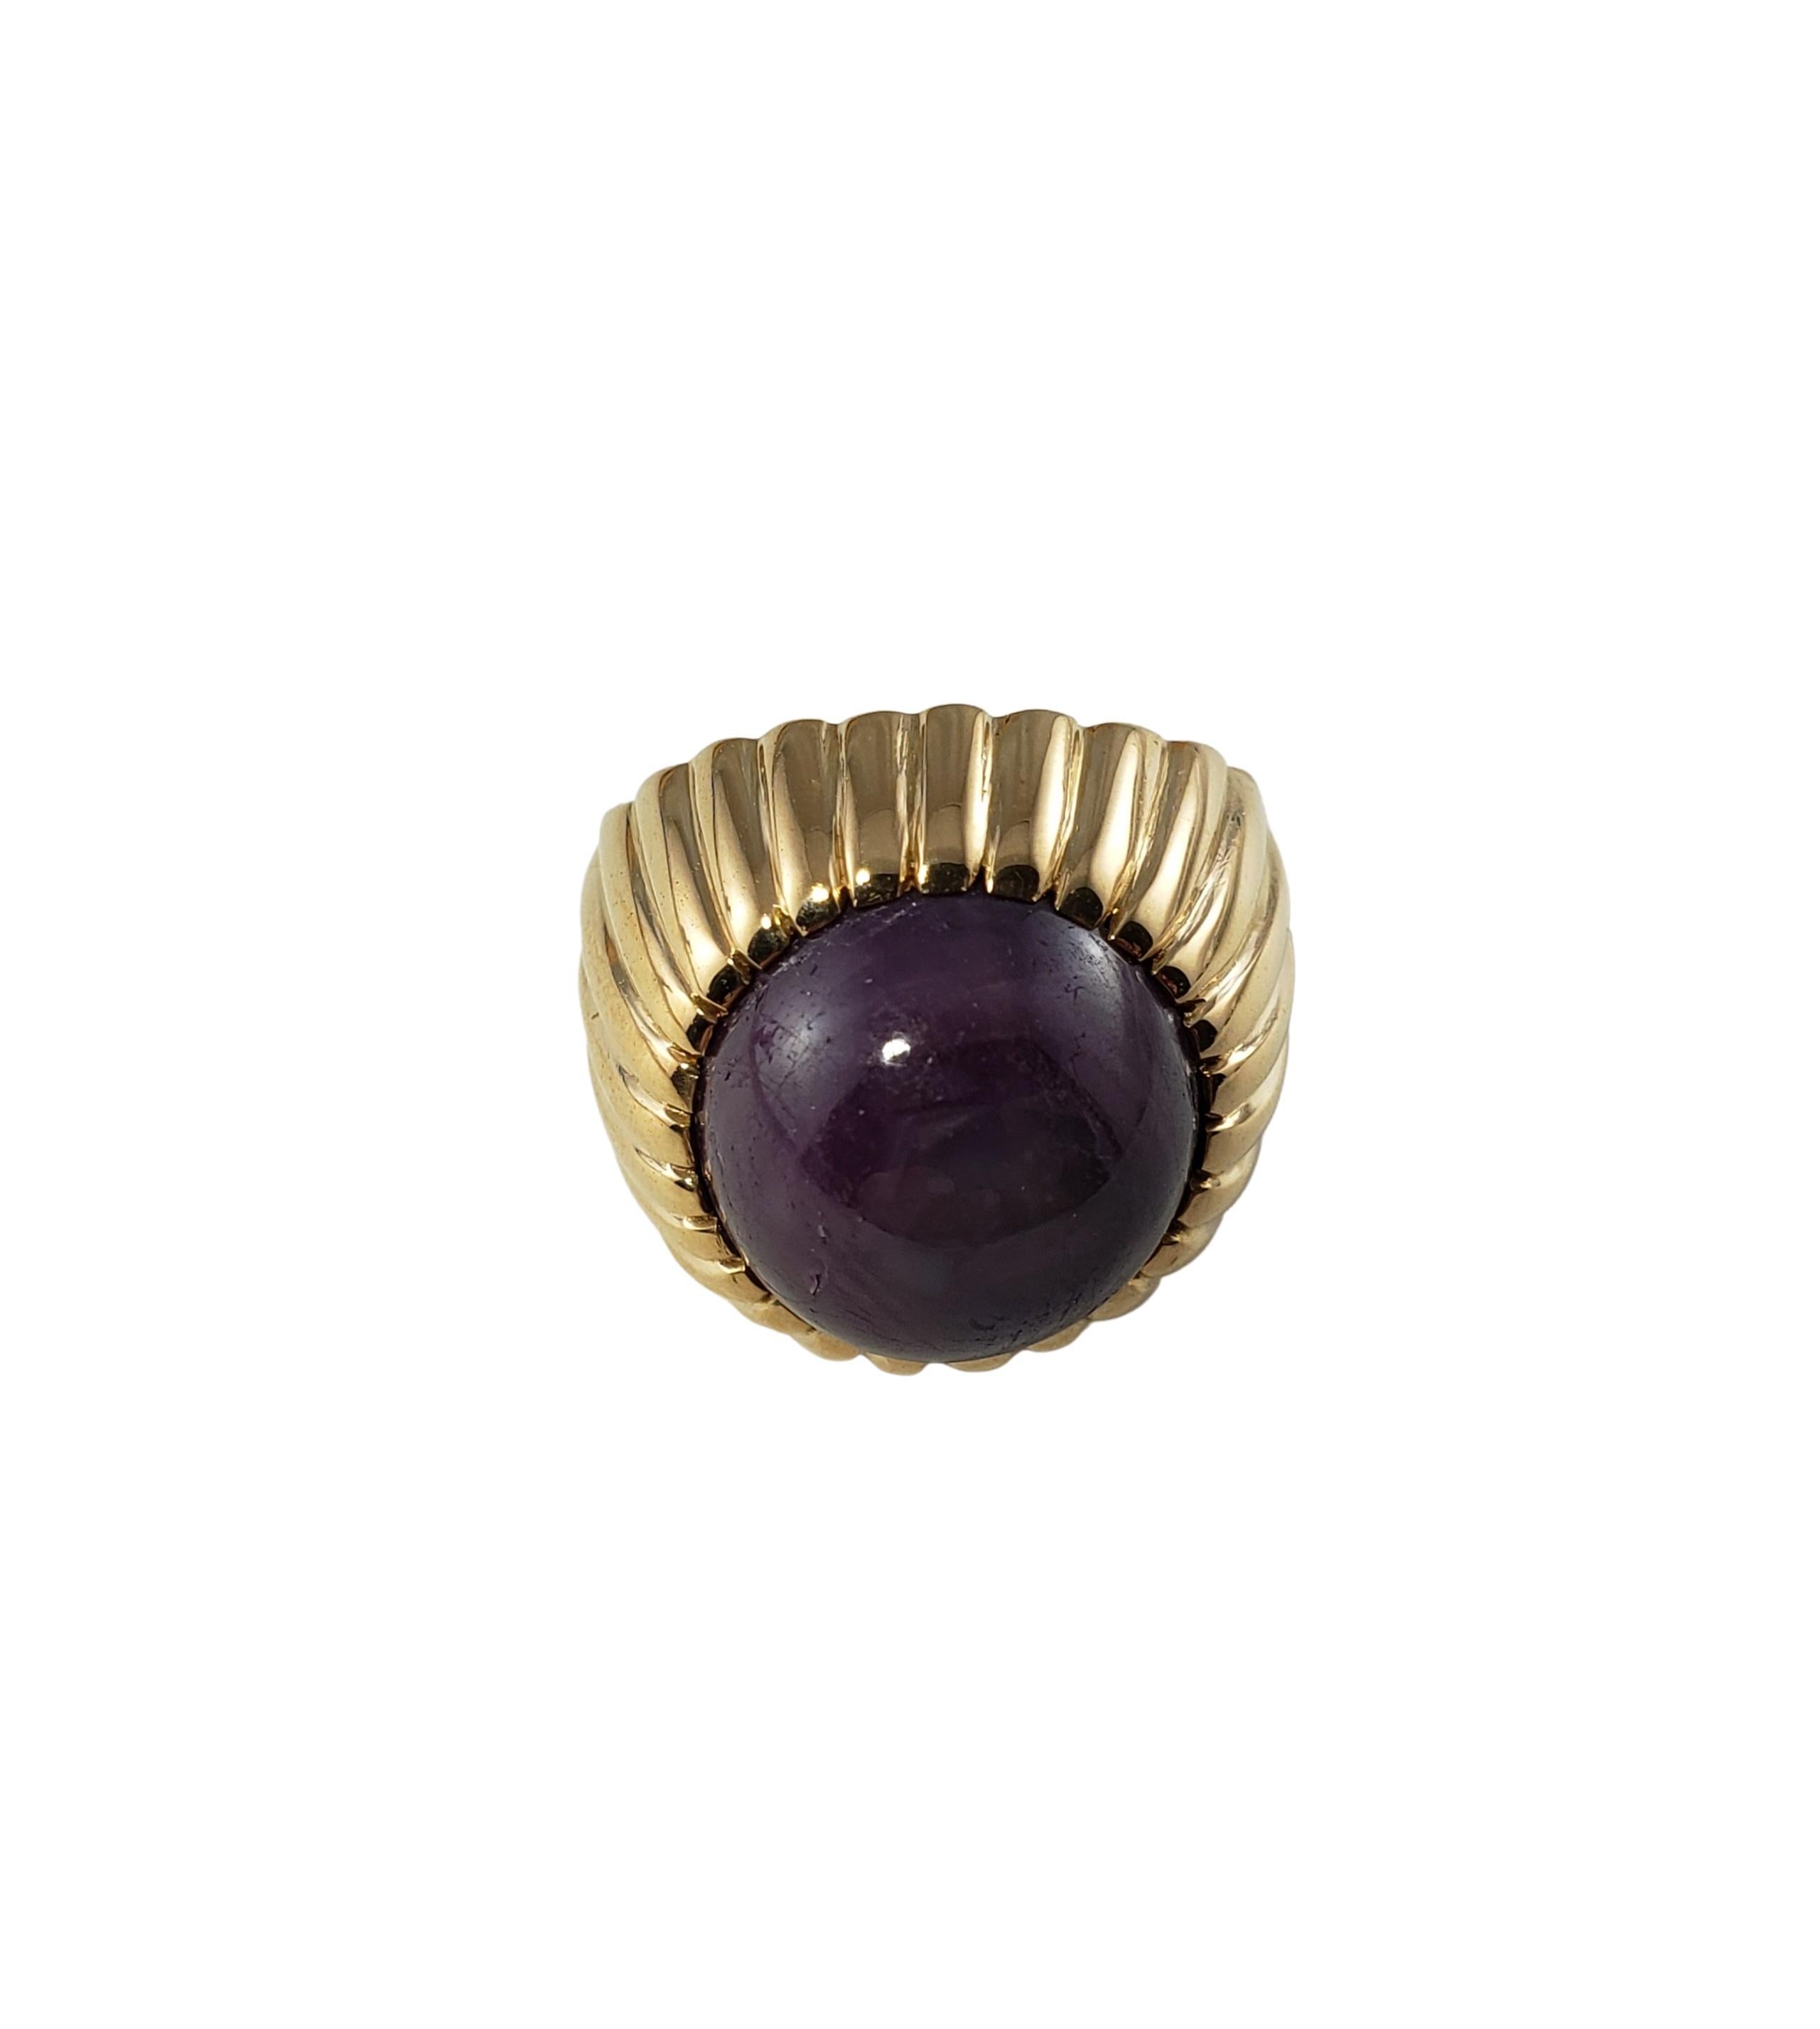 14 Karat Yellow Gold Star Ruby Ring Size 3-

This lovely ring features one round cabochon purple star ruby (12 mm) set in beautifully detailed 14K yellow gold. Width: 18 mm.
Height: 10 mm. Shank: 4 mm.

Total ruby weight: 15.50 ct.

Ring Size: